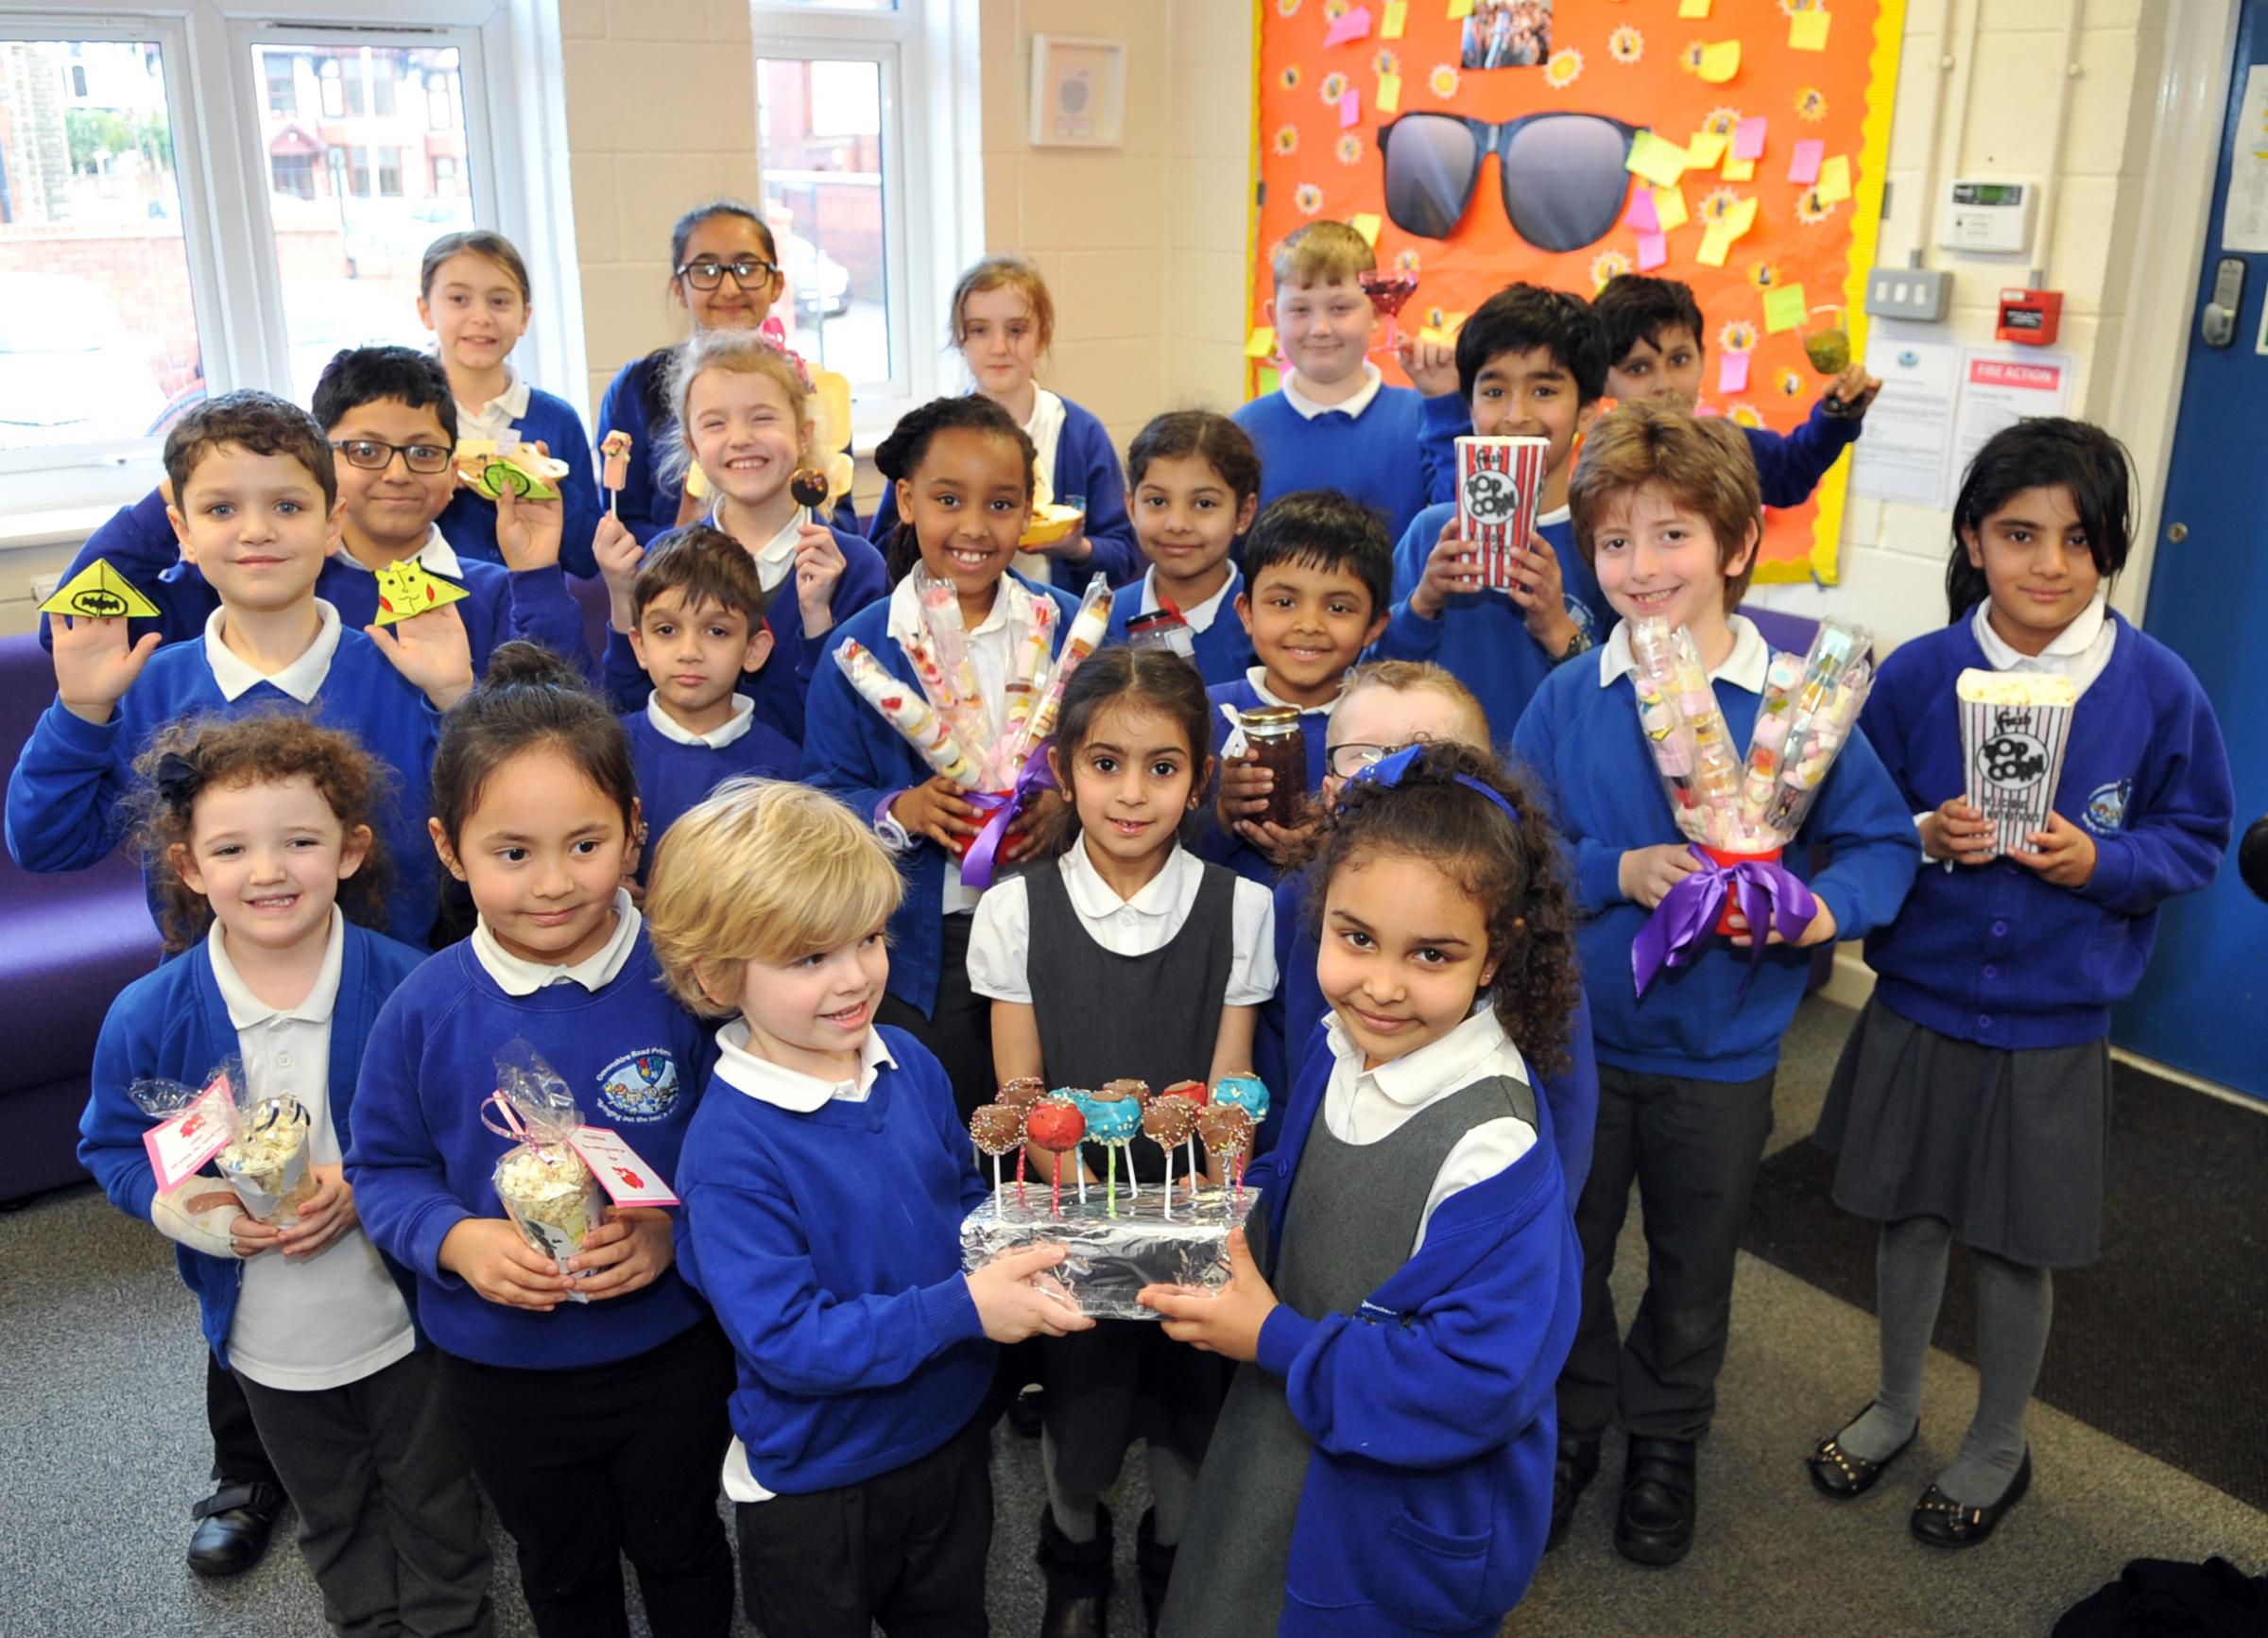 Children turn a £100 profit with £10 startup business ideas during enterprise week